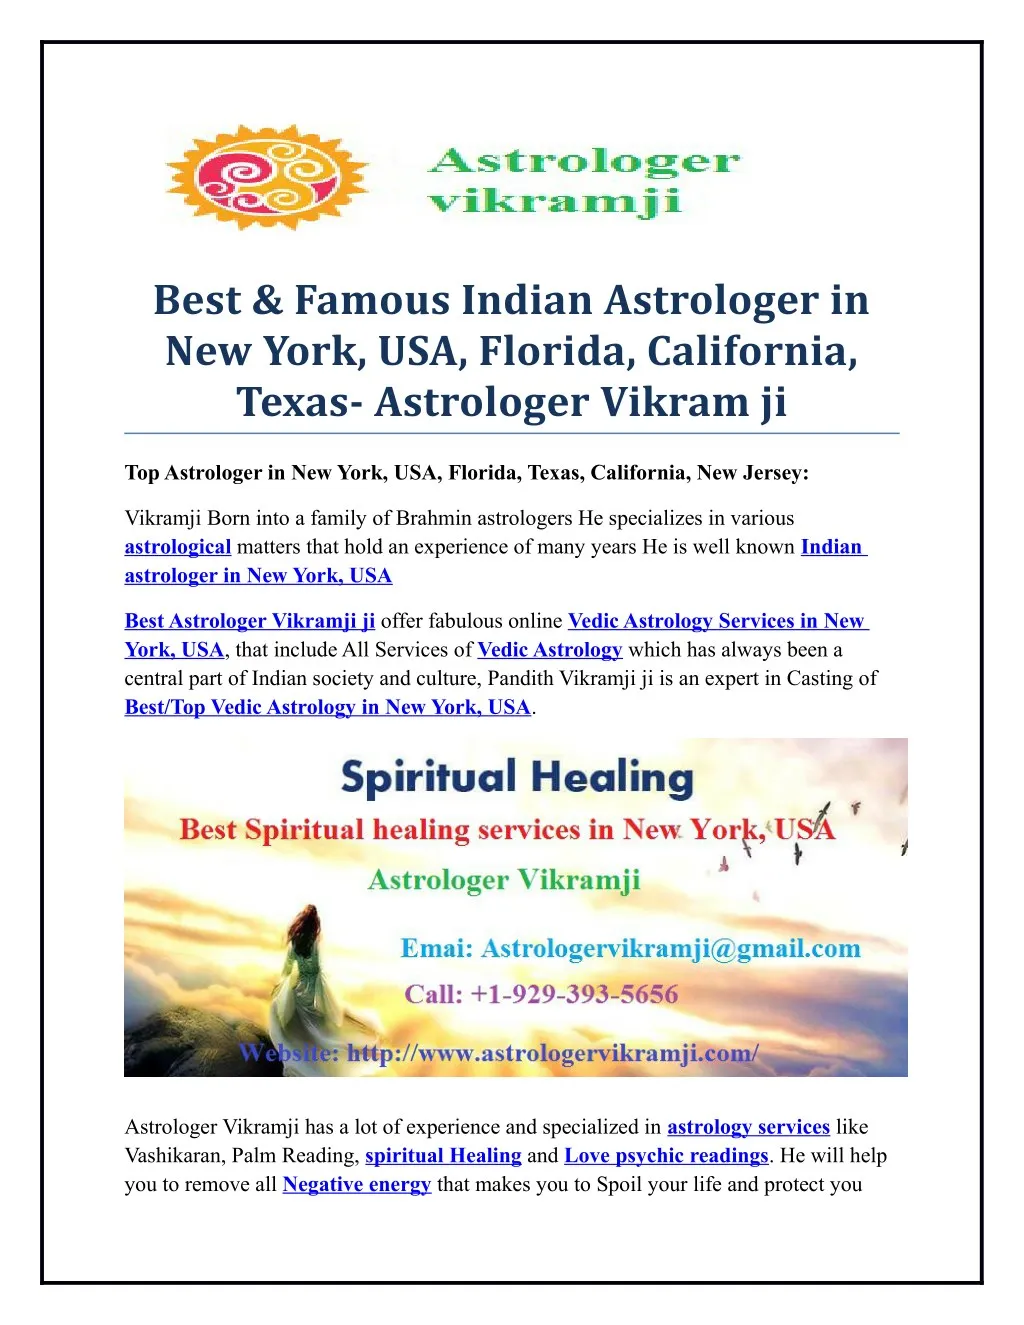 best famous indian astrologer in new york